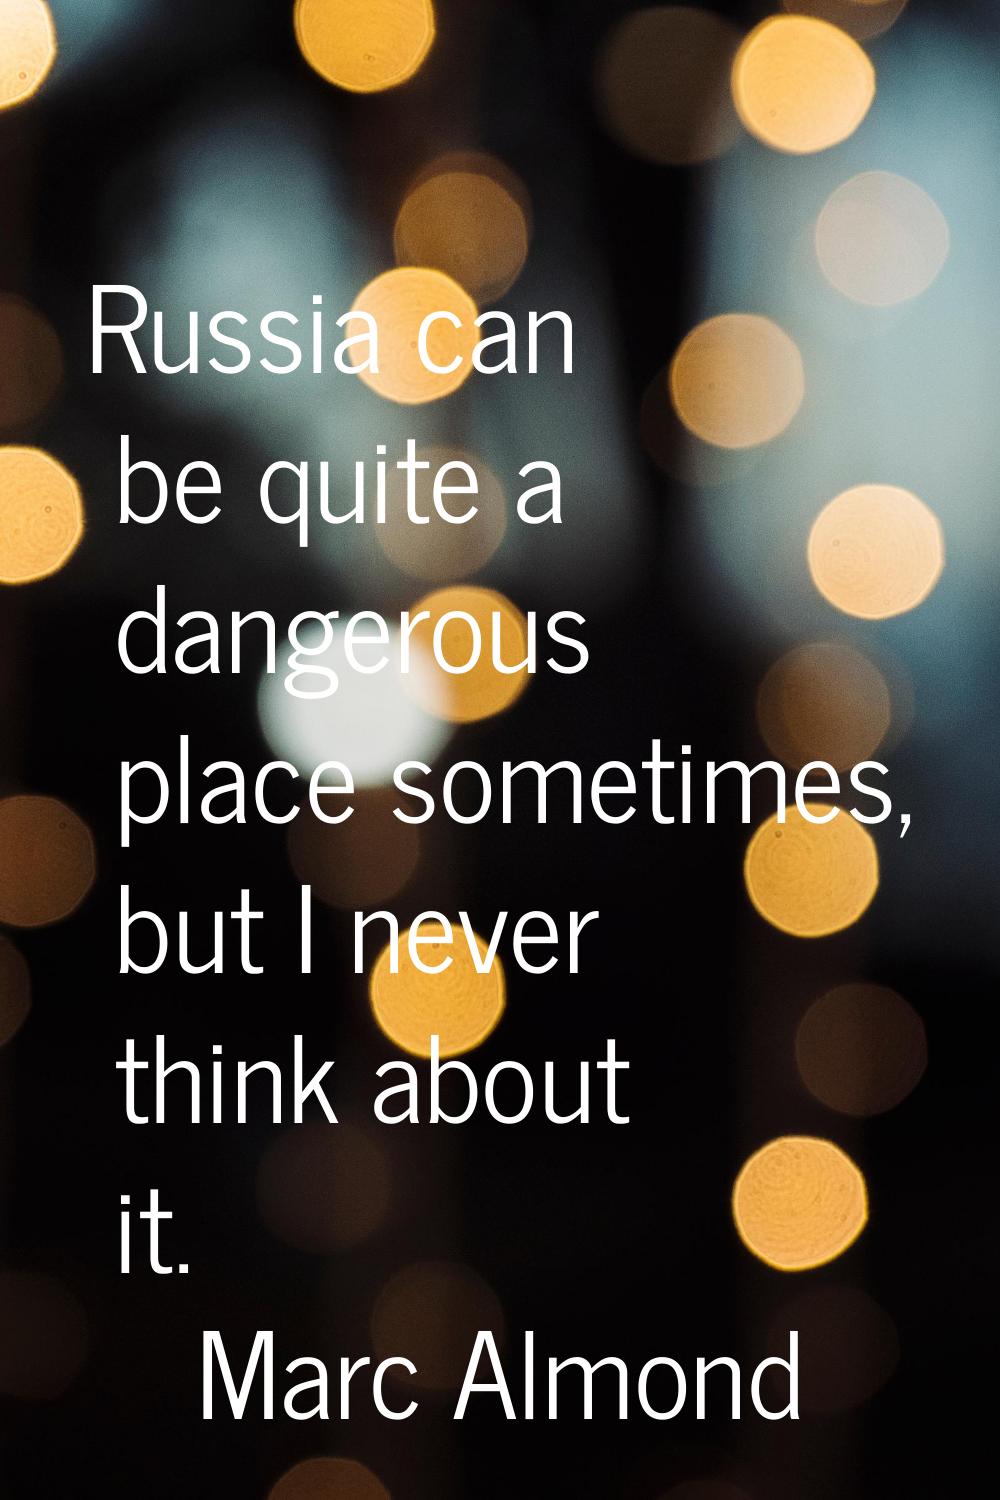 Russia can be quite a dangerous place sometimes, but I never think about it.